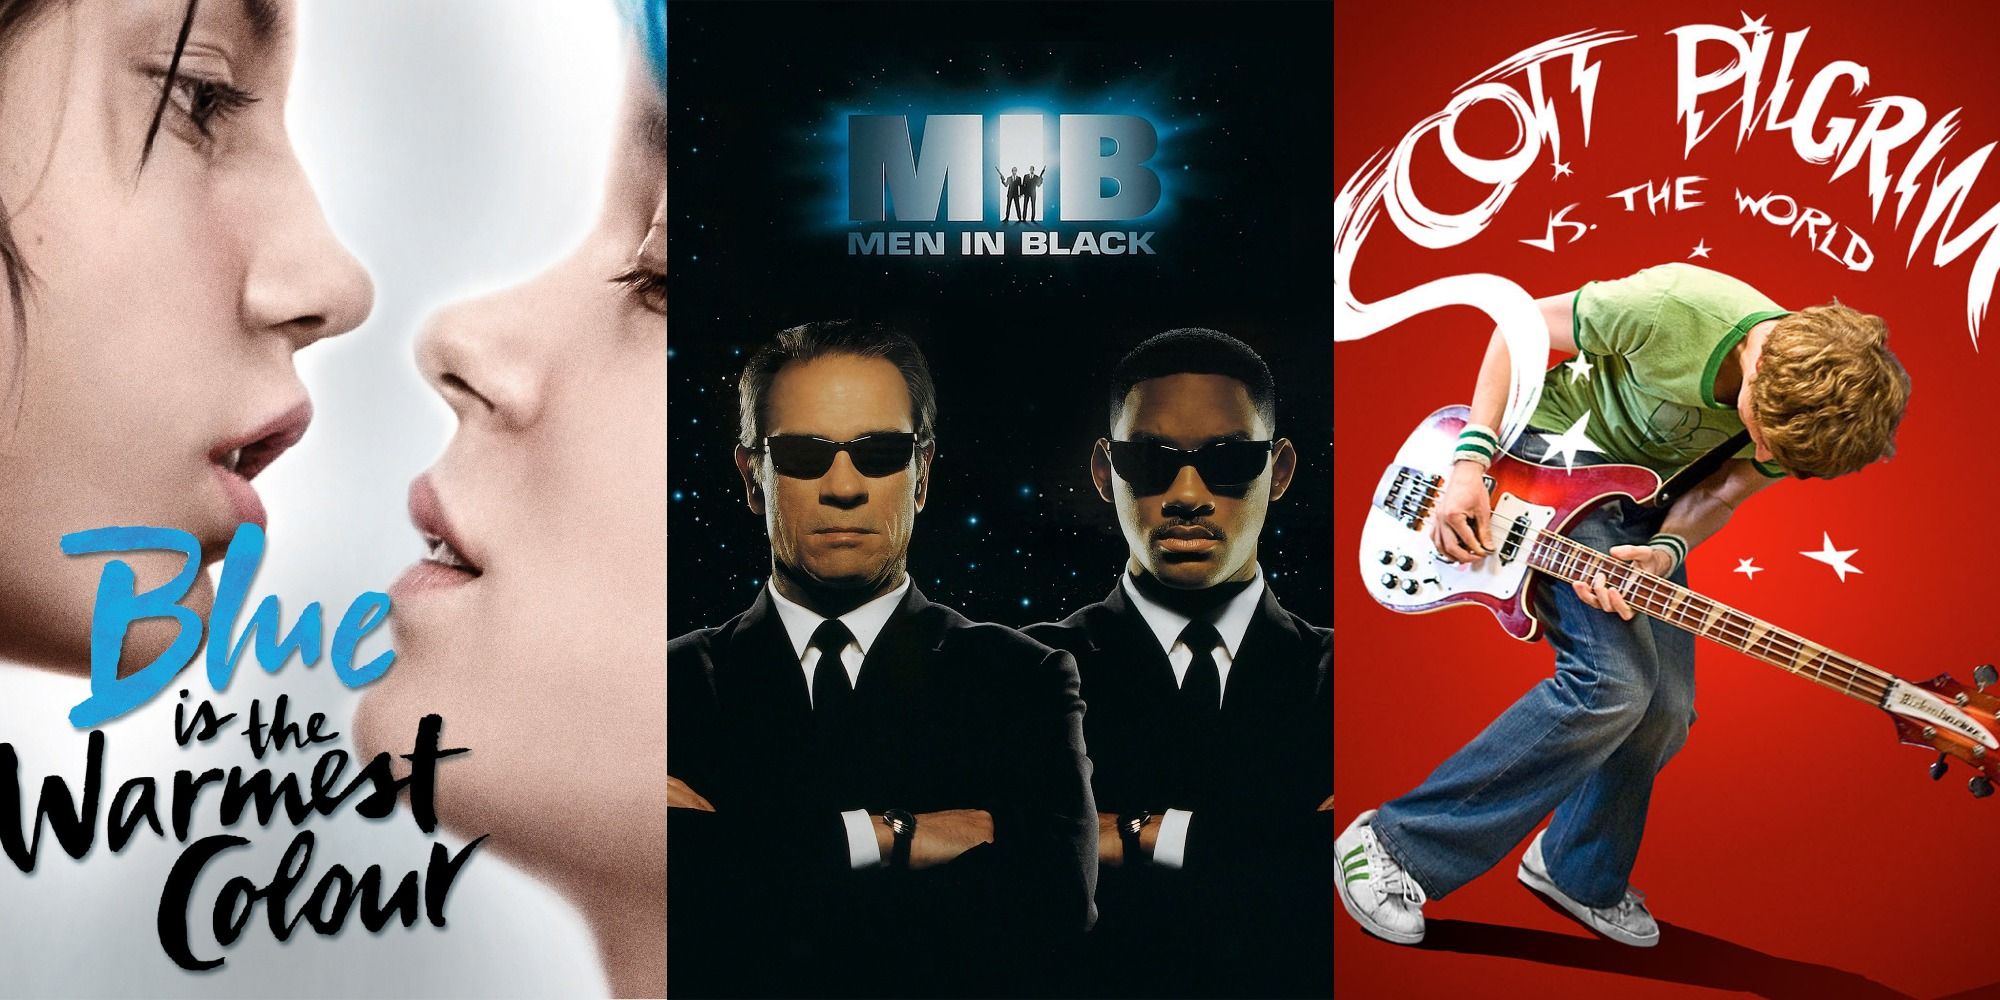 Combined posters of Men in Black, Blue Is the Warmest Colour, and Scott Pilgrim vs. the World